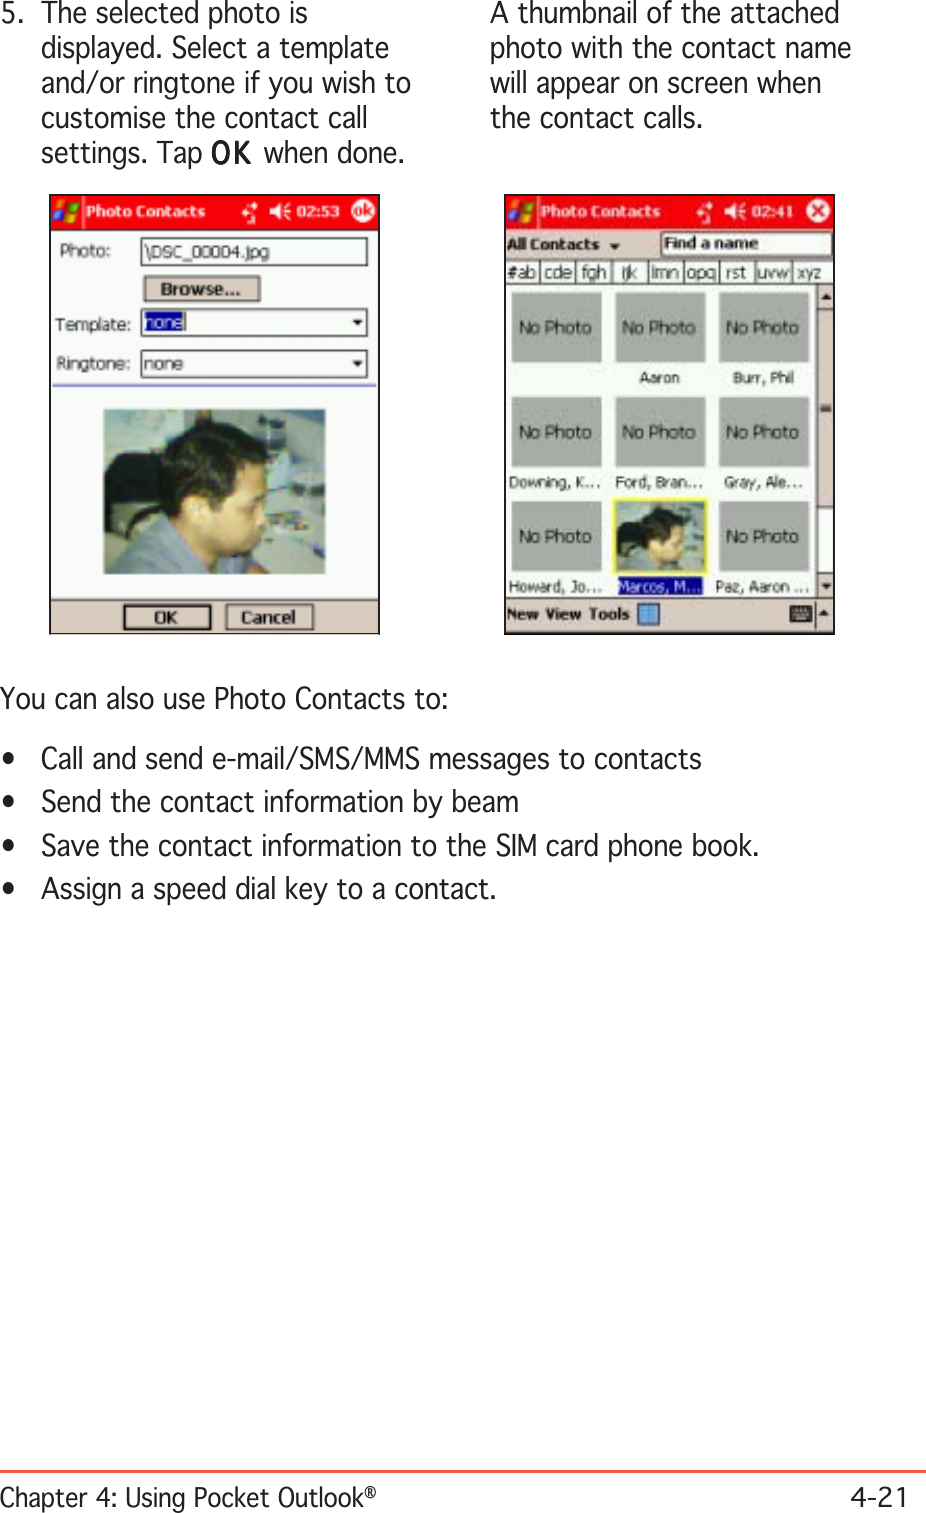 Chapter 4: Using Pocket Outlook®4-215. The selected photo isdisplayed. Select a templateand/or ringtone if you wish tocustomise the contact callsettings. Tap OKOKOKOKOK when done.A thumbnail of the attachedphoto with the contact namewill appear on screen whenthe contact calls.You can also use Photo Contacts to:• Call and send e-mail/SMS/MMS messages to contacts• Send the contact information by beam• Save the contact information to the SIM card phone book.• Assign a speed dial key to a contact.